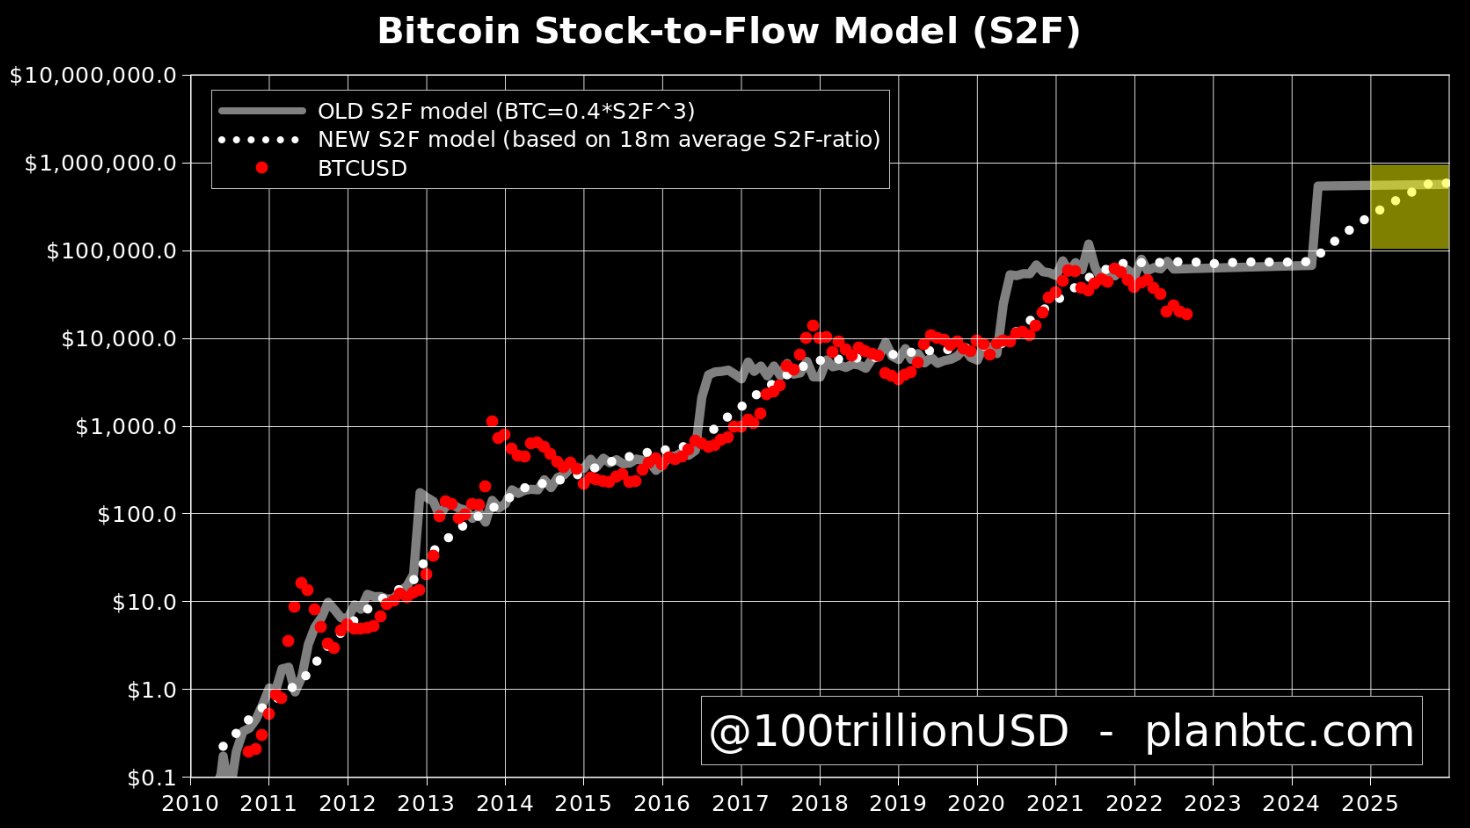 Bitcoin stock-to-flow model (S2F)